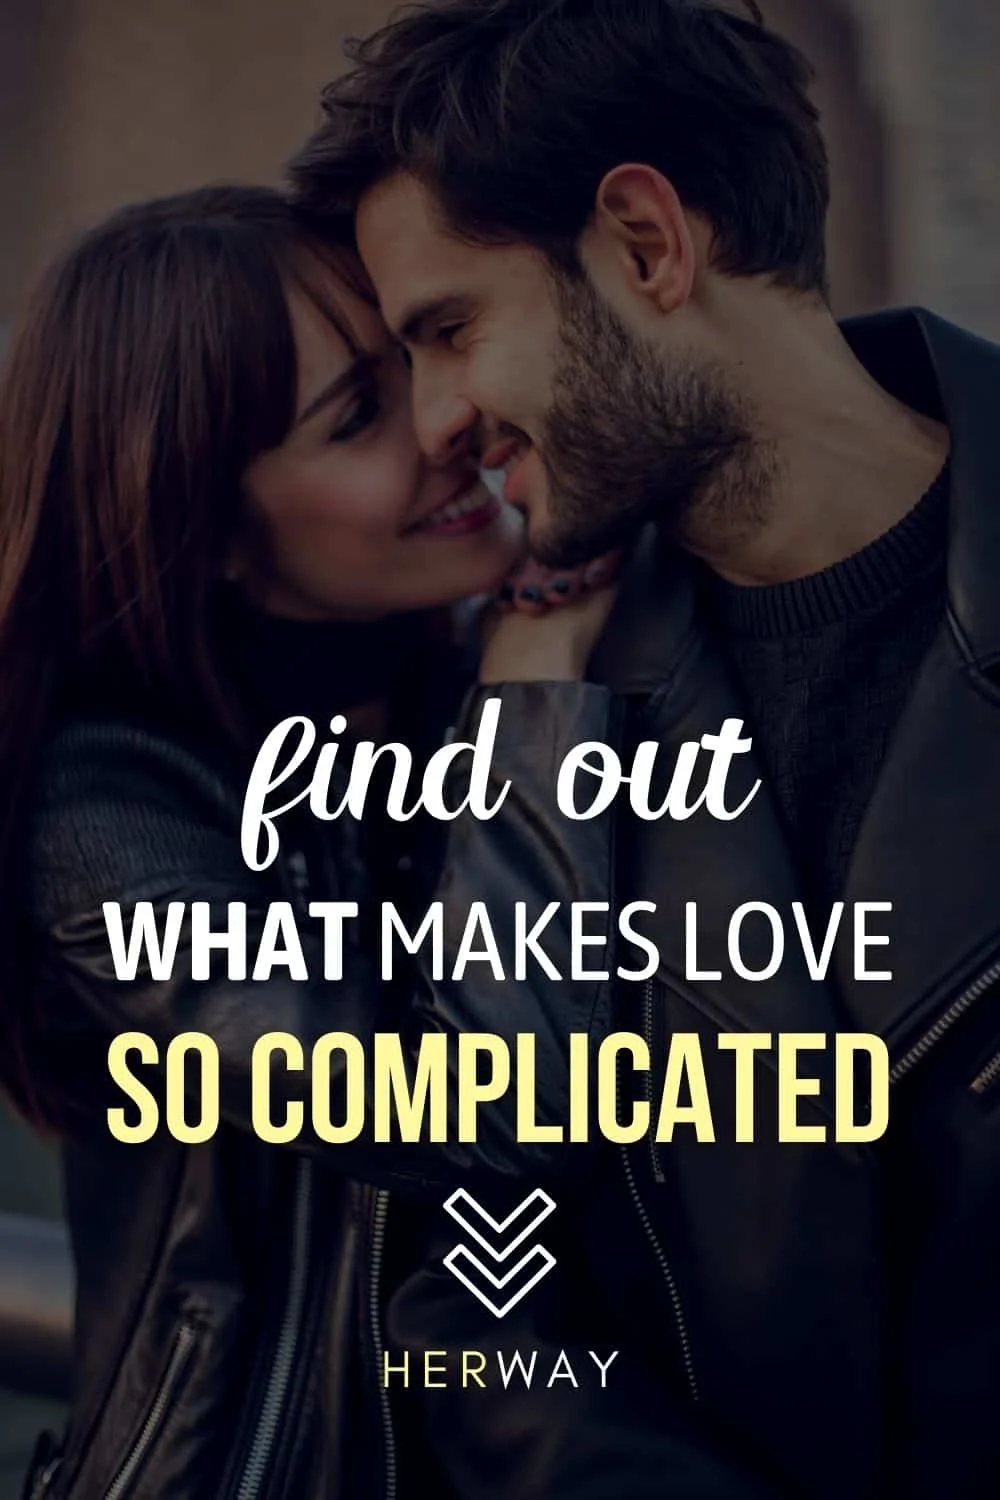 Love Is Complicated 20 Reasons Why And What To Do About It Pinterest